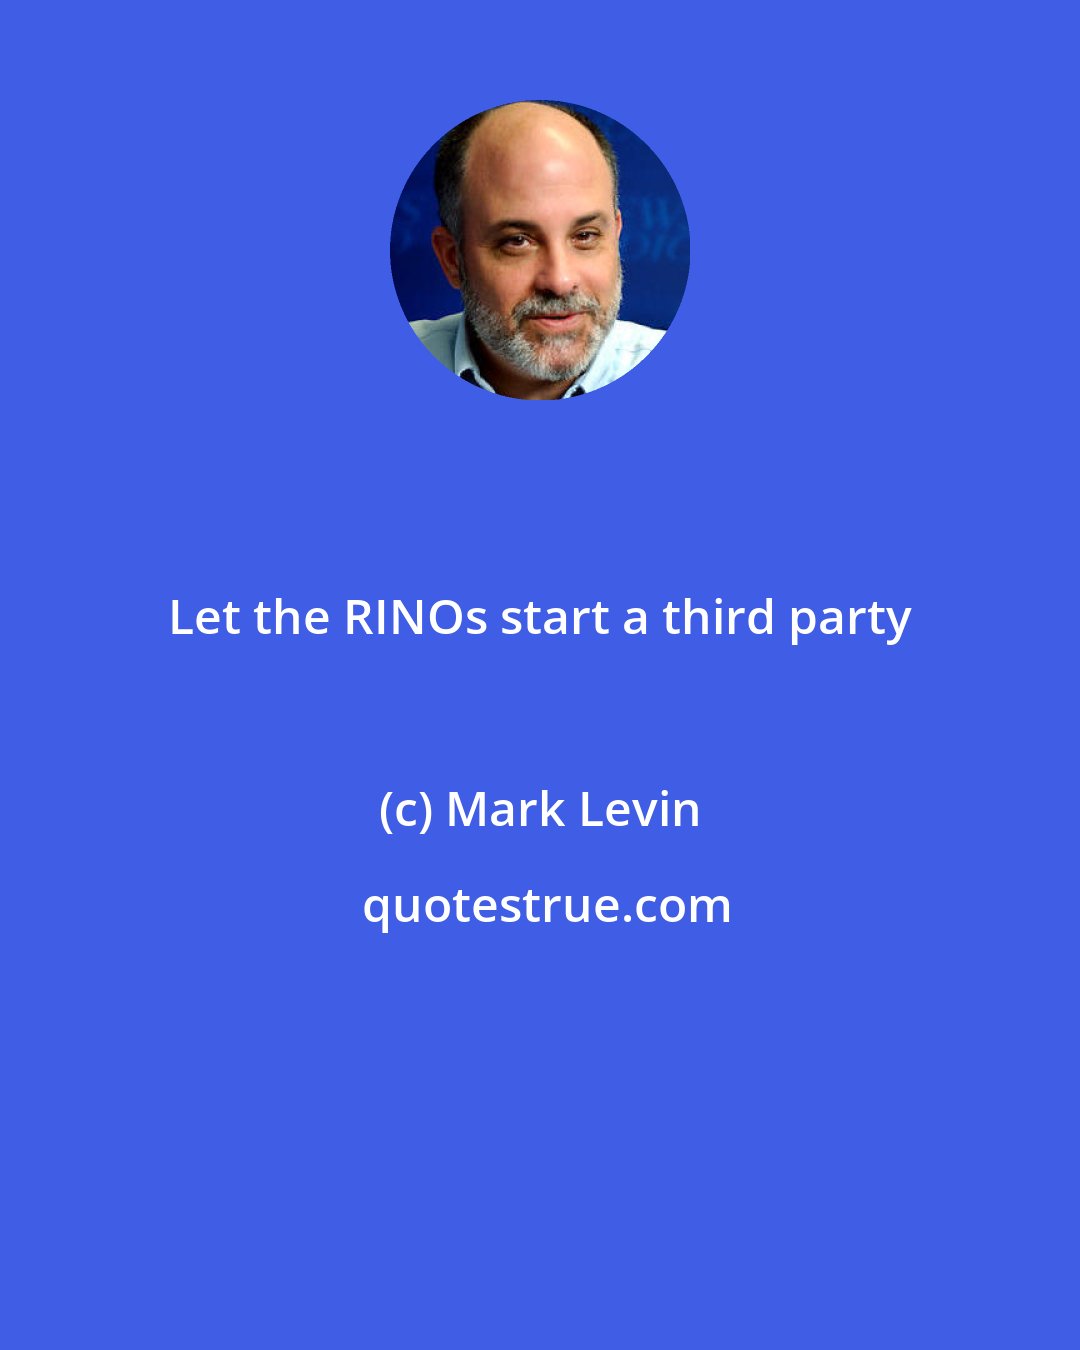 Mark Levin: Let the RINOs start a third party